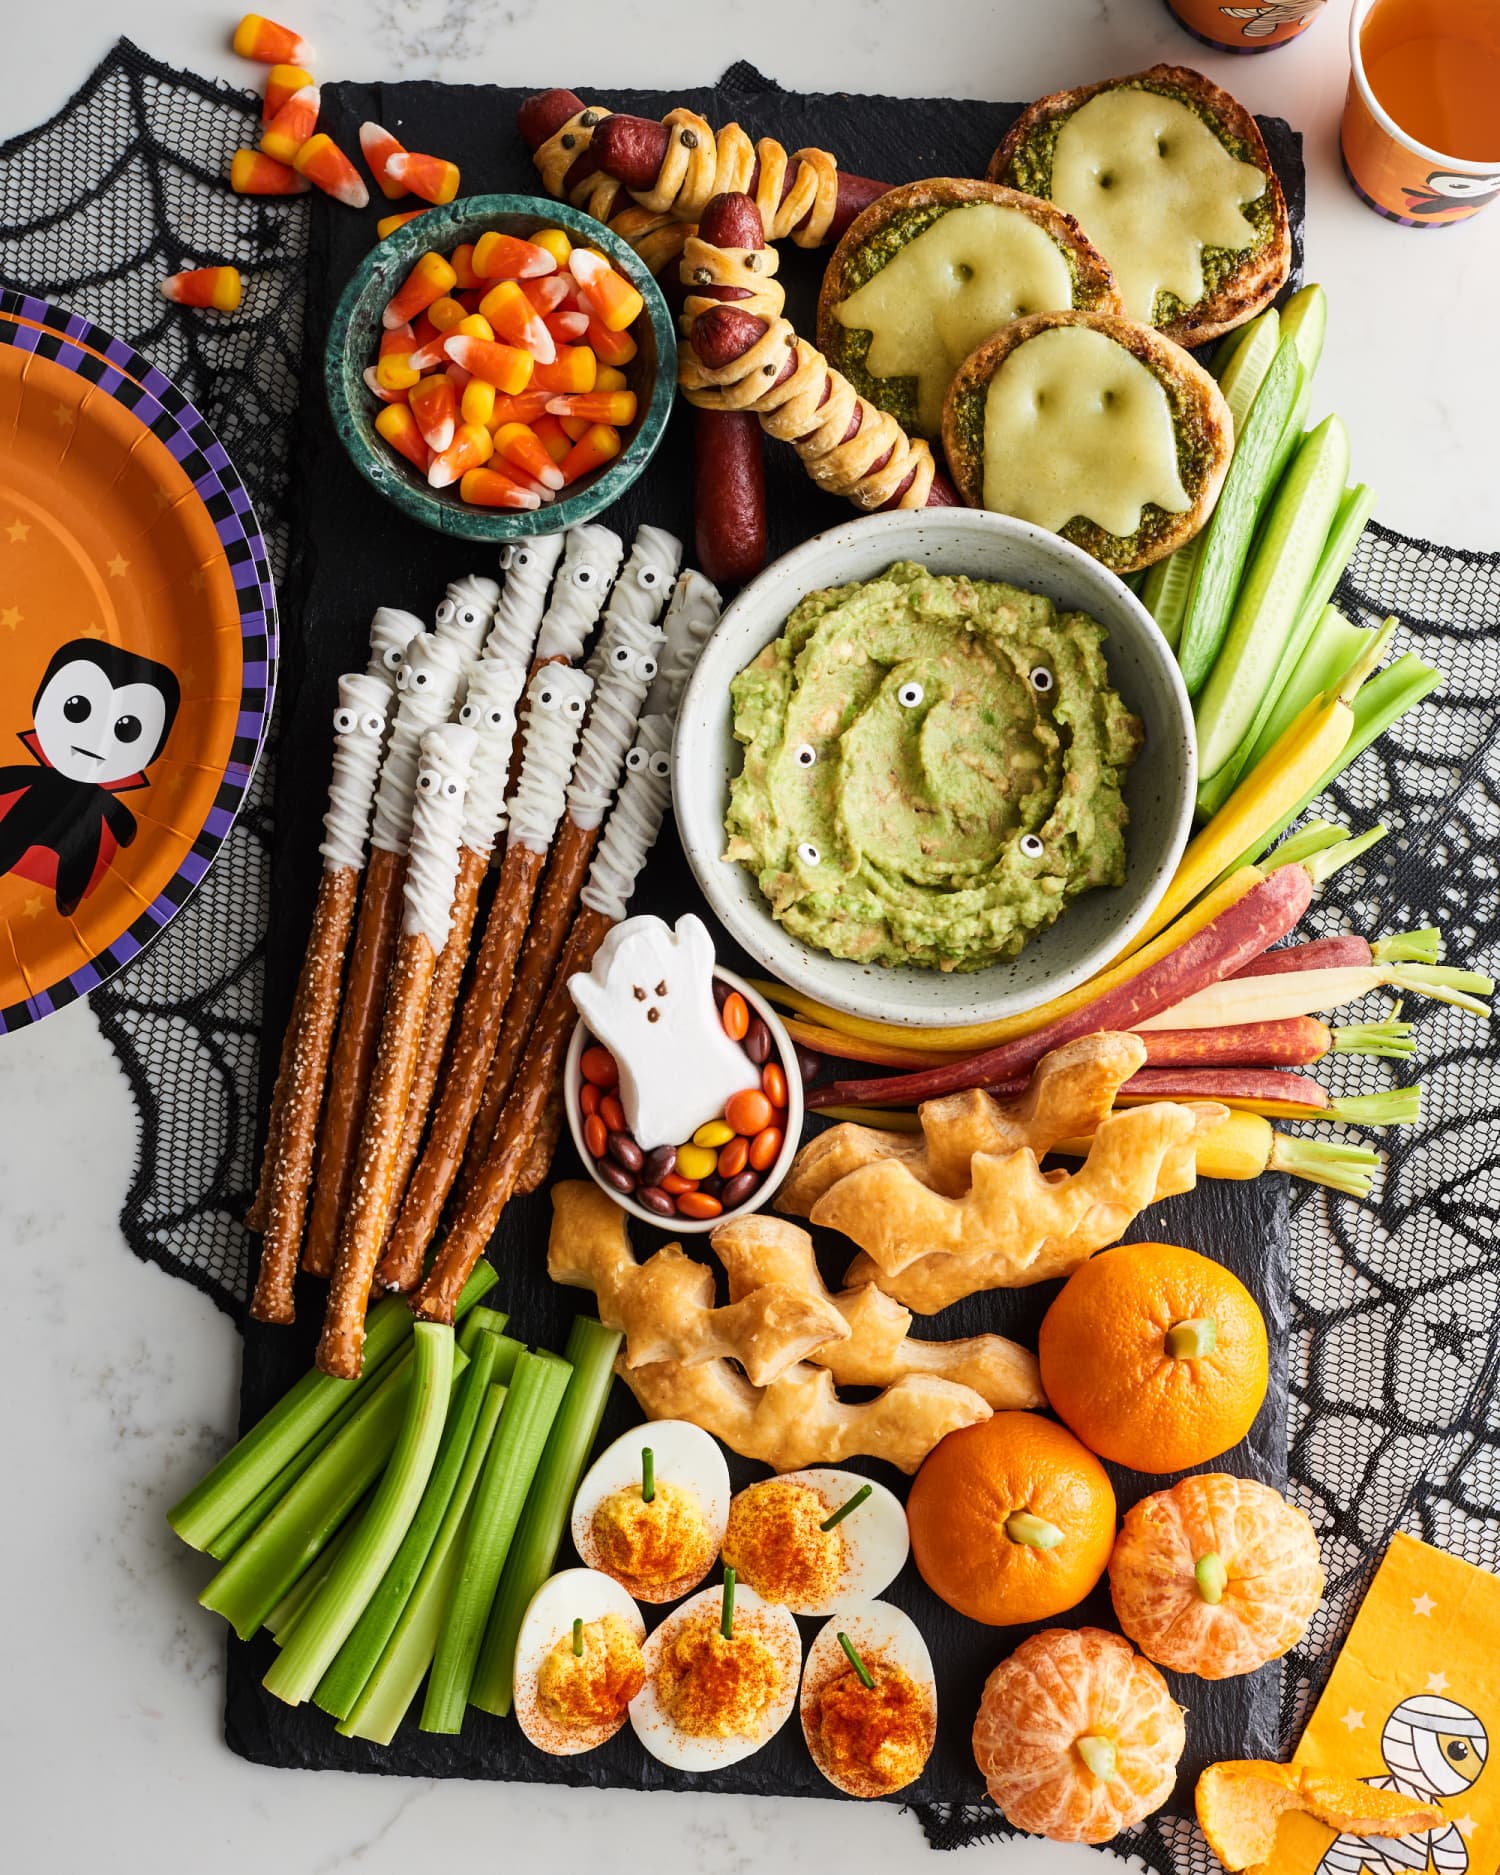 Here's How to Make a Halloween Snack Board | Kitchn